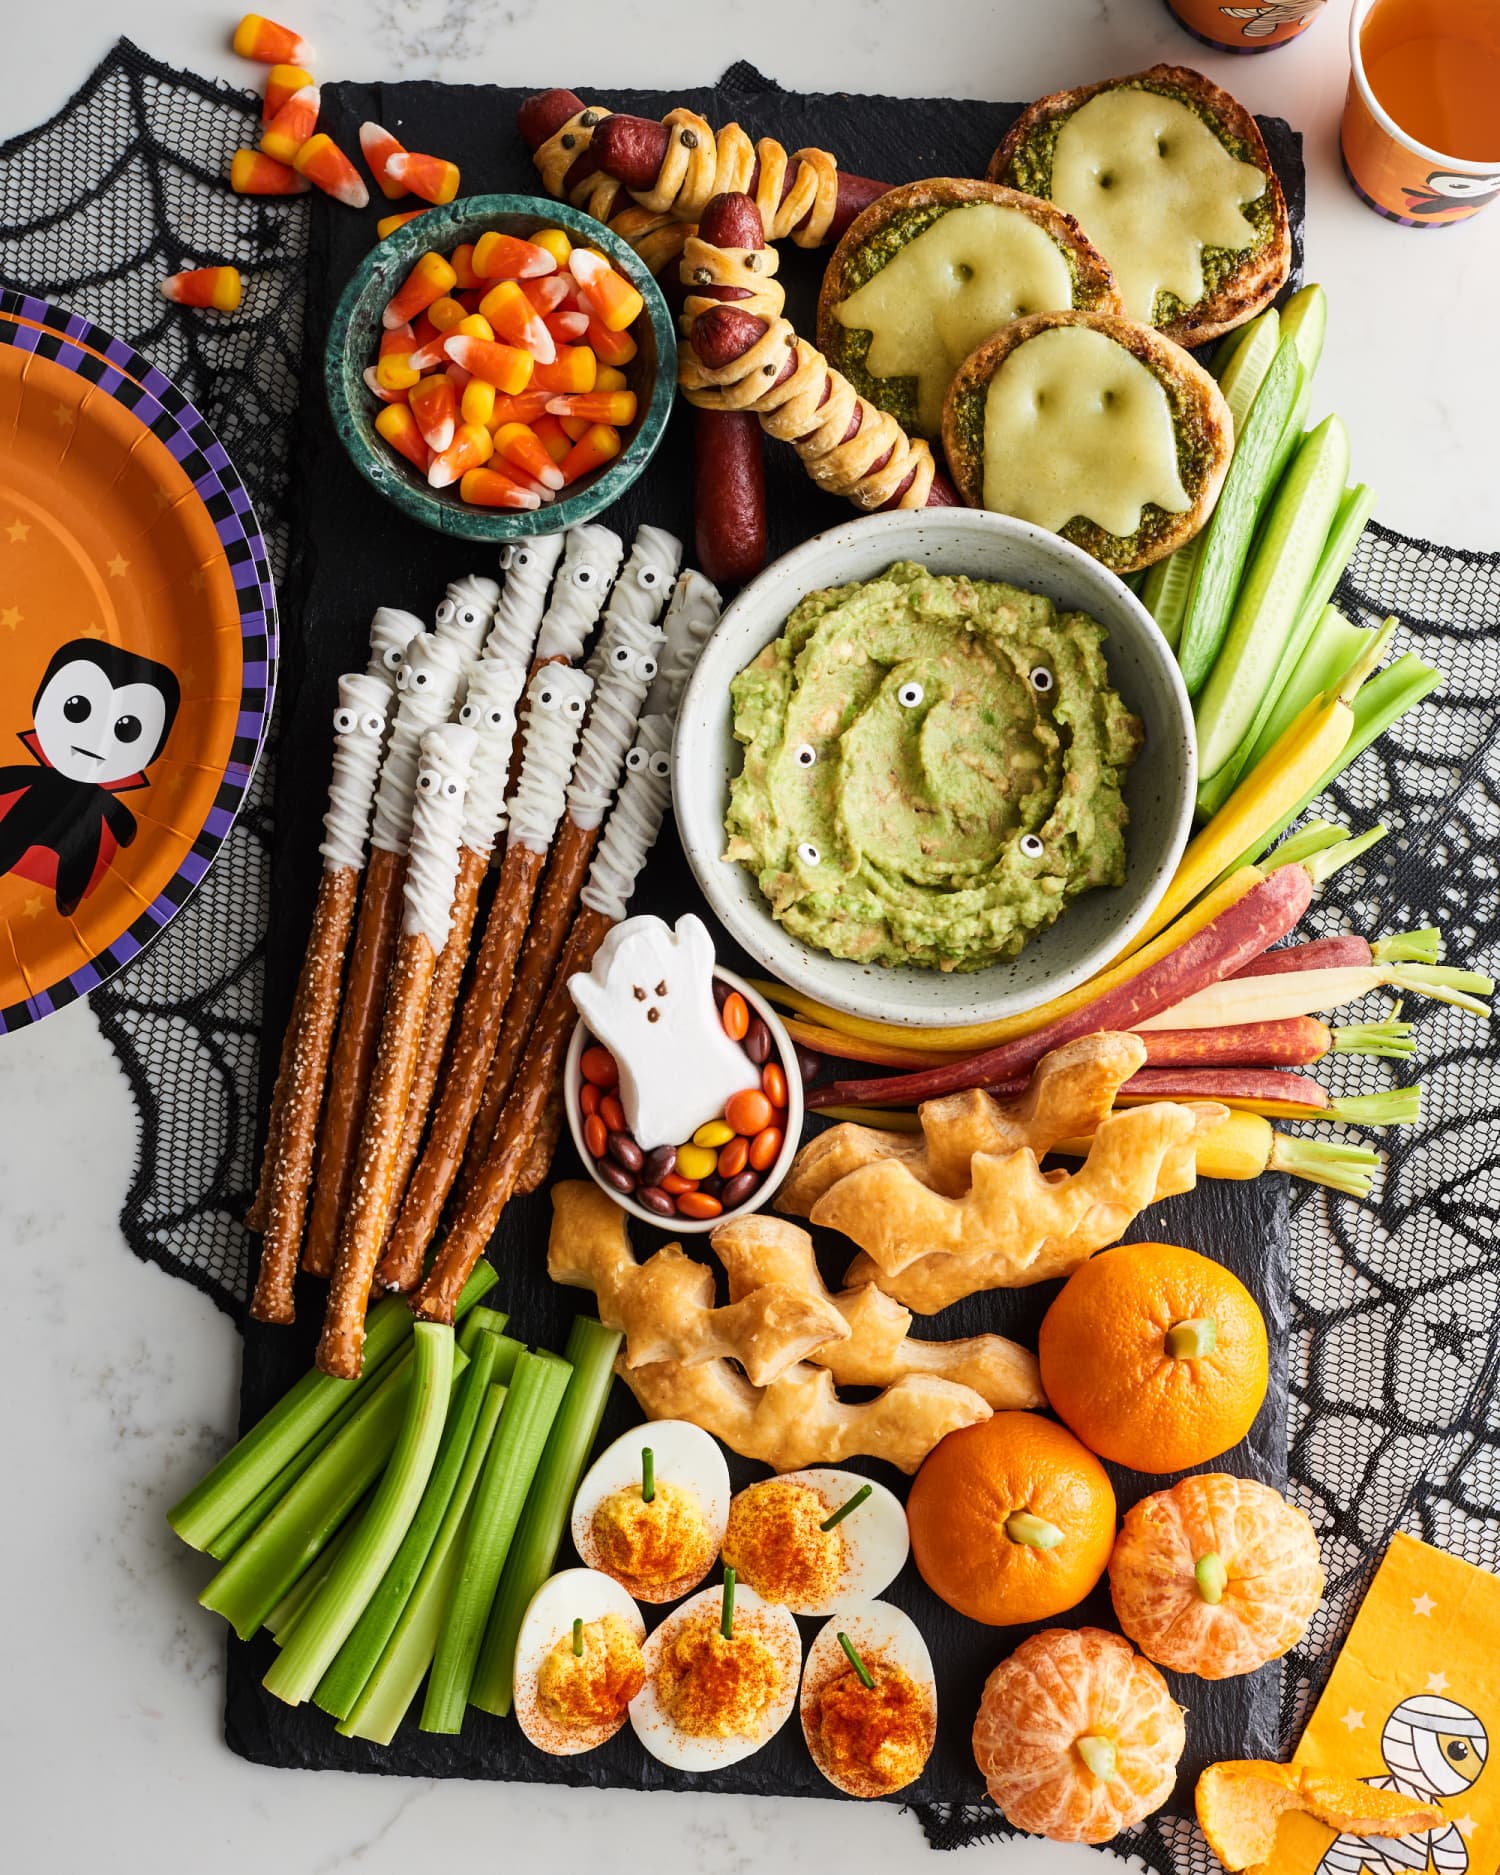 Here's How to Make a Halloween Snack Board | Kitchn